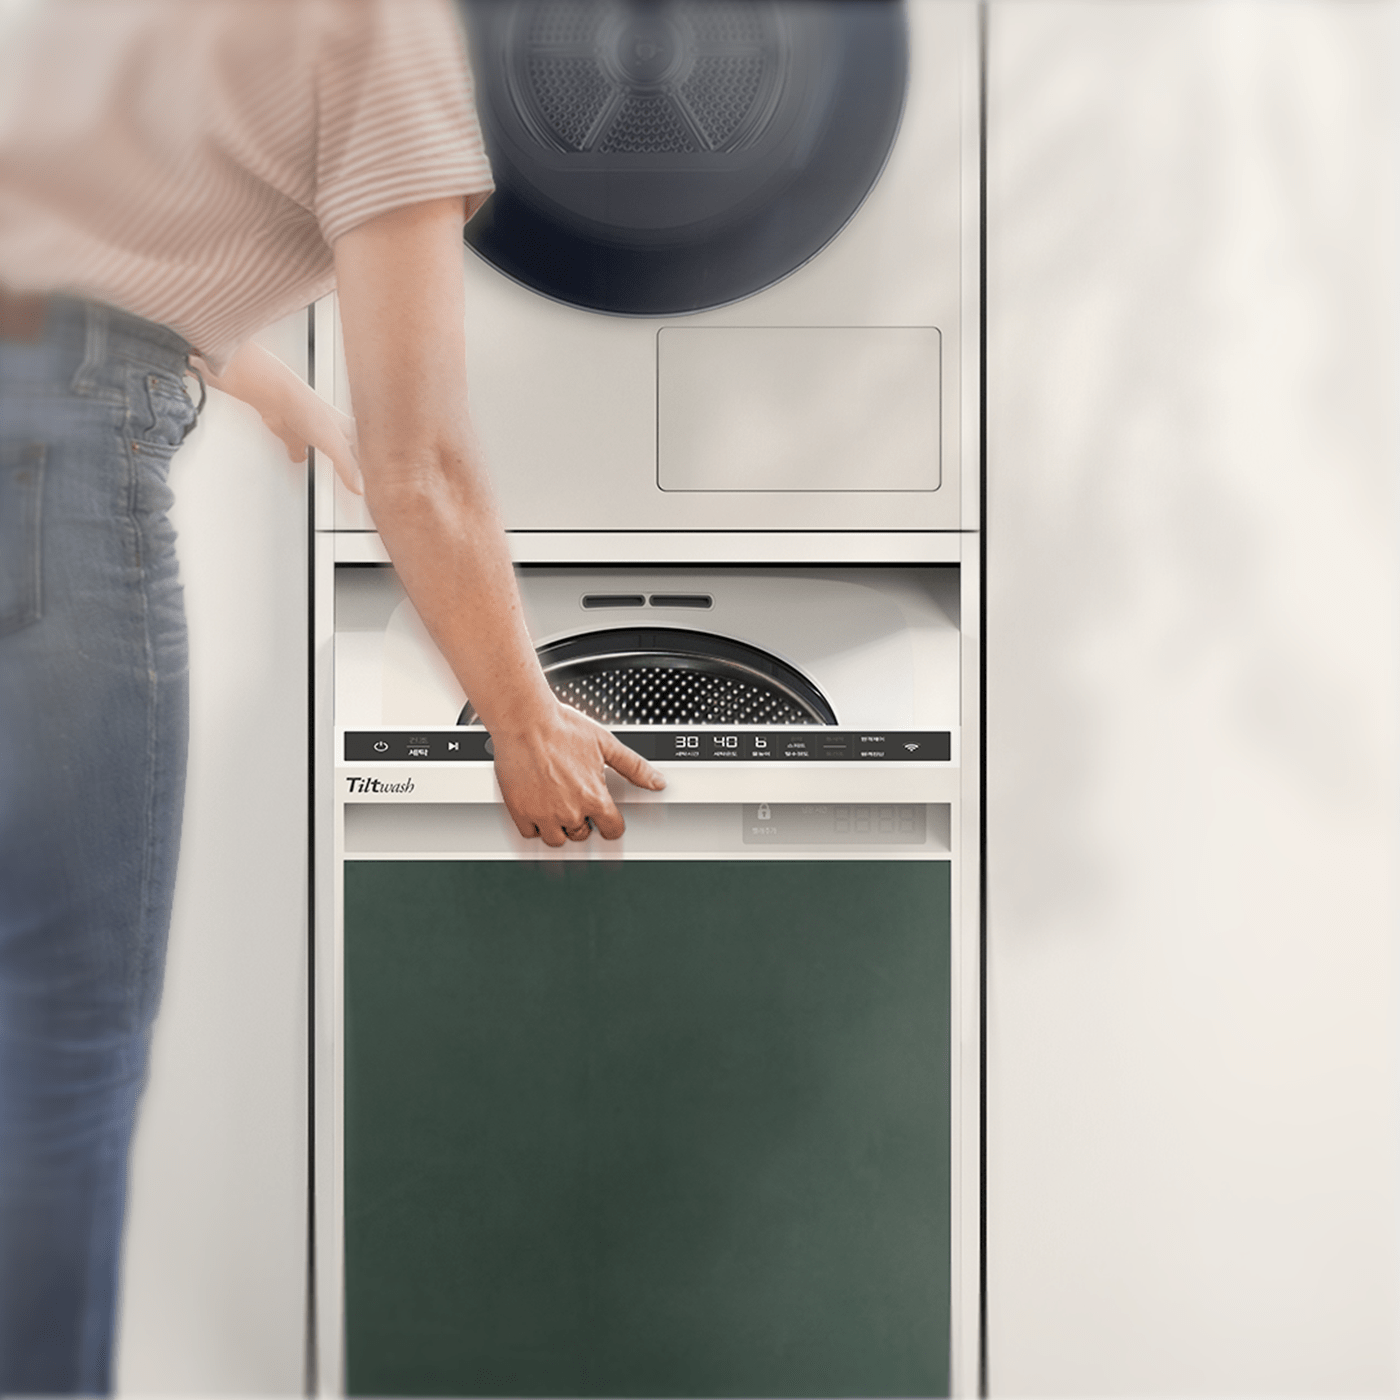 concept design household appliances hyun yeol shin industrial design  product product design  washer Washing machine ux